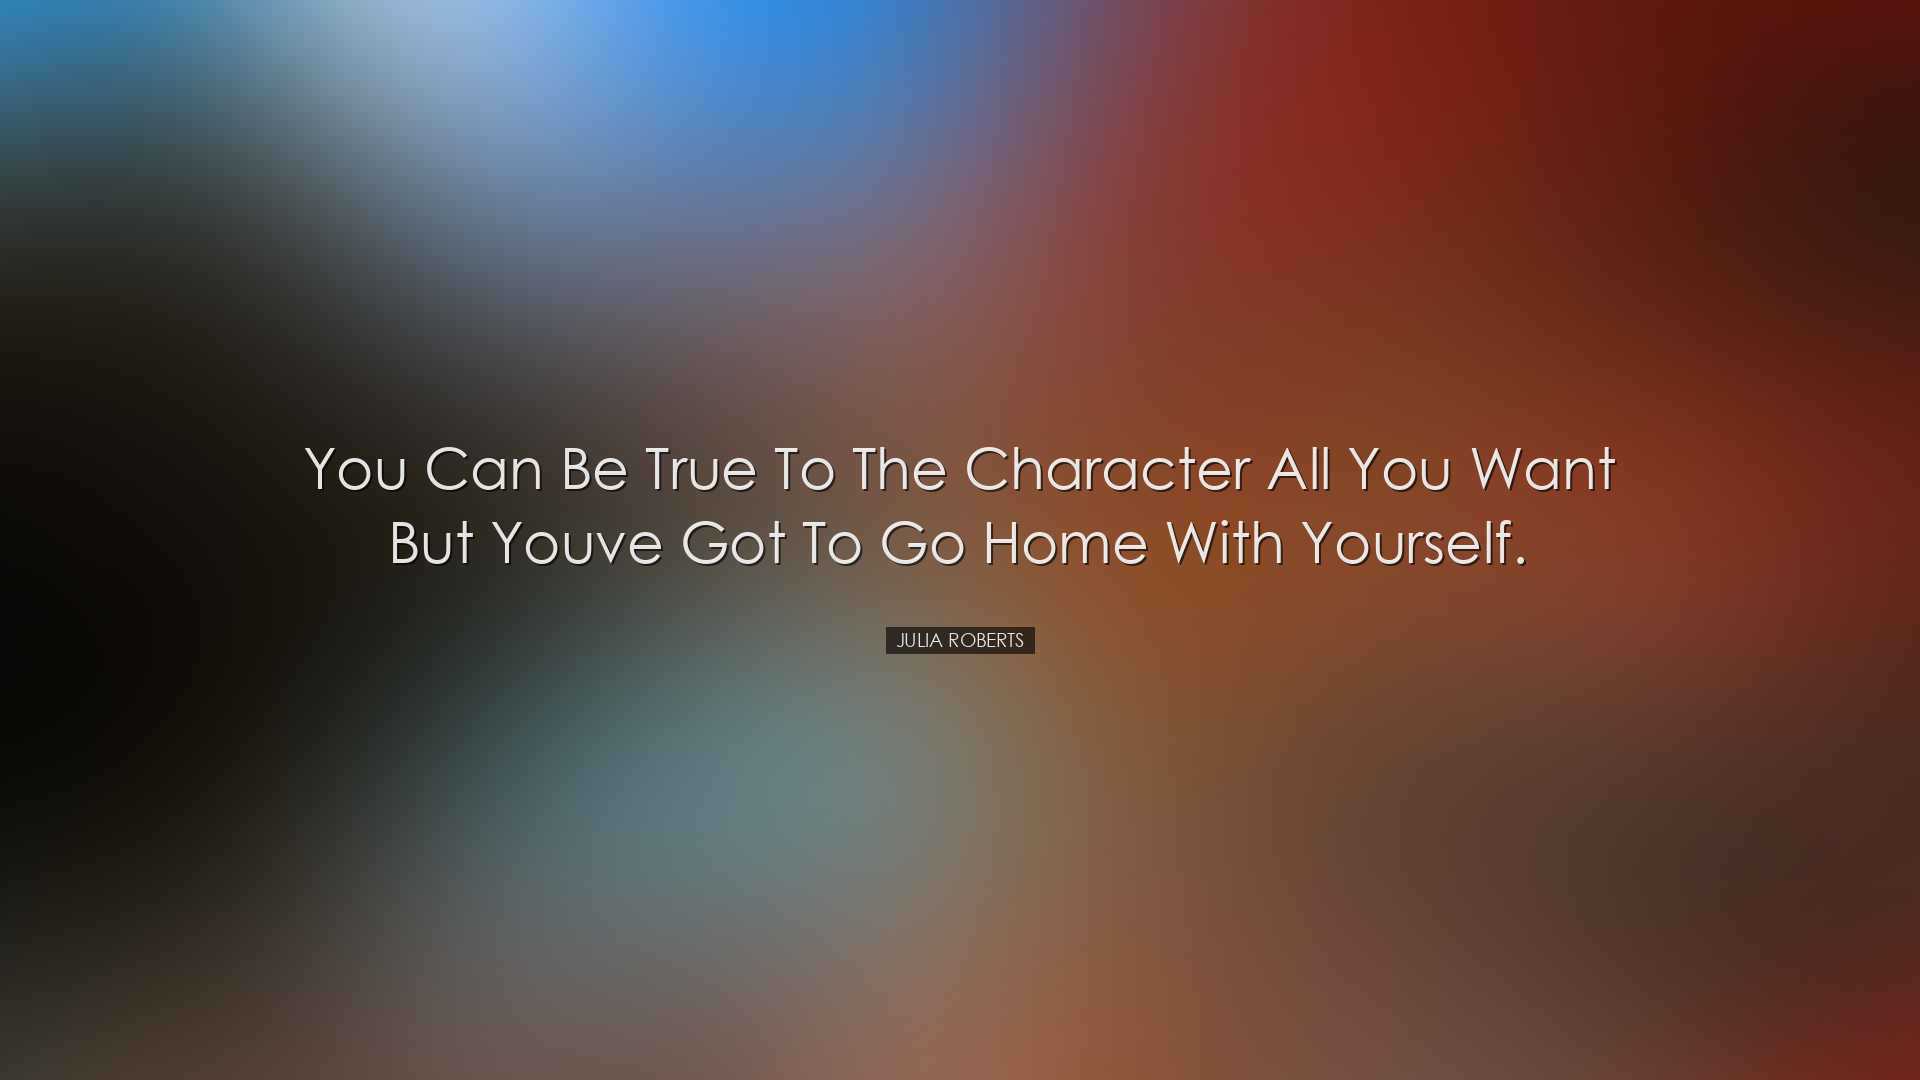 You can be true to the character all you want but youve got to go